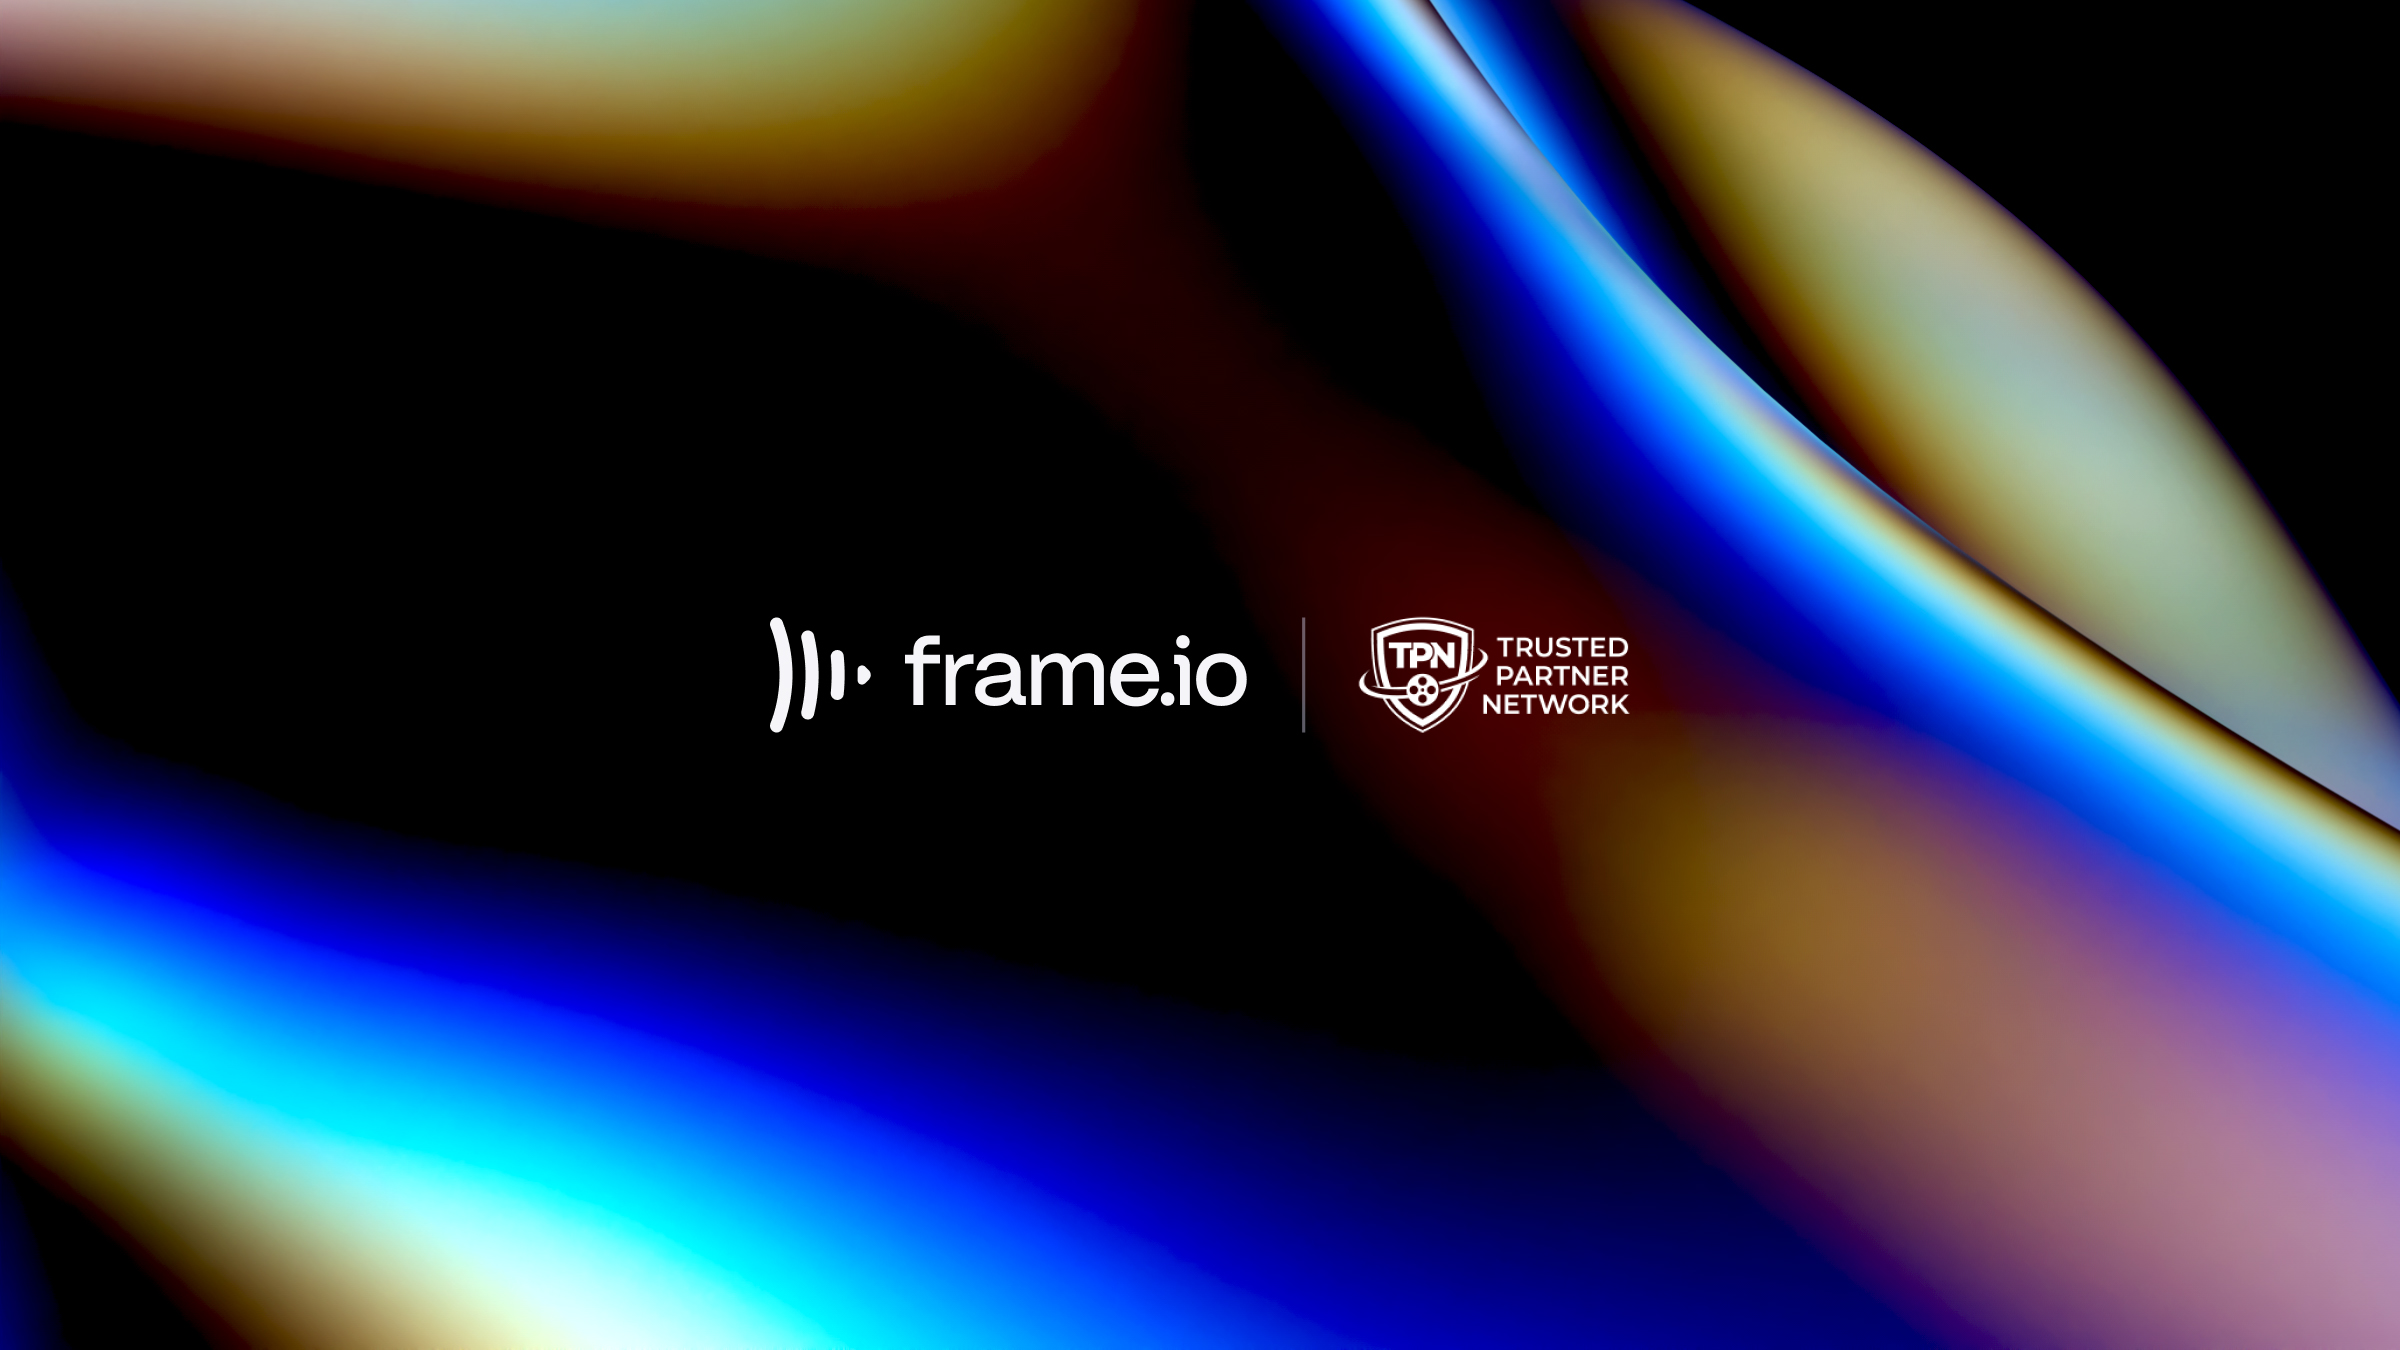 Adobe and Frame.io Become Early Adopters of TPN+ Platform